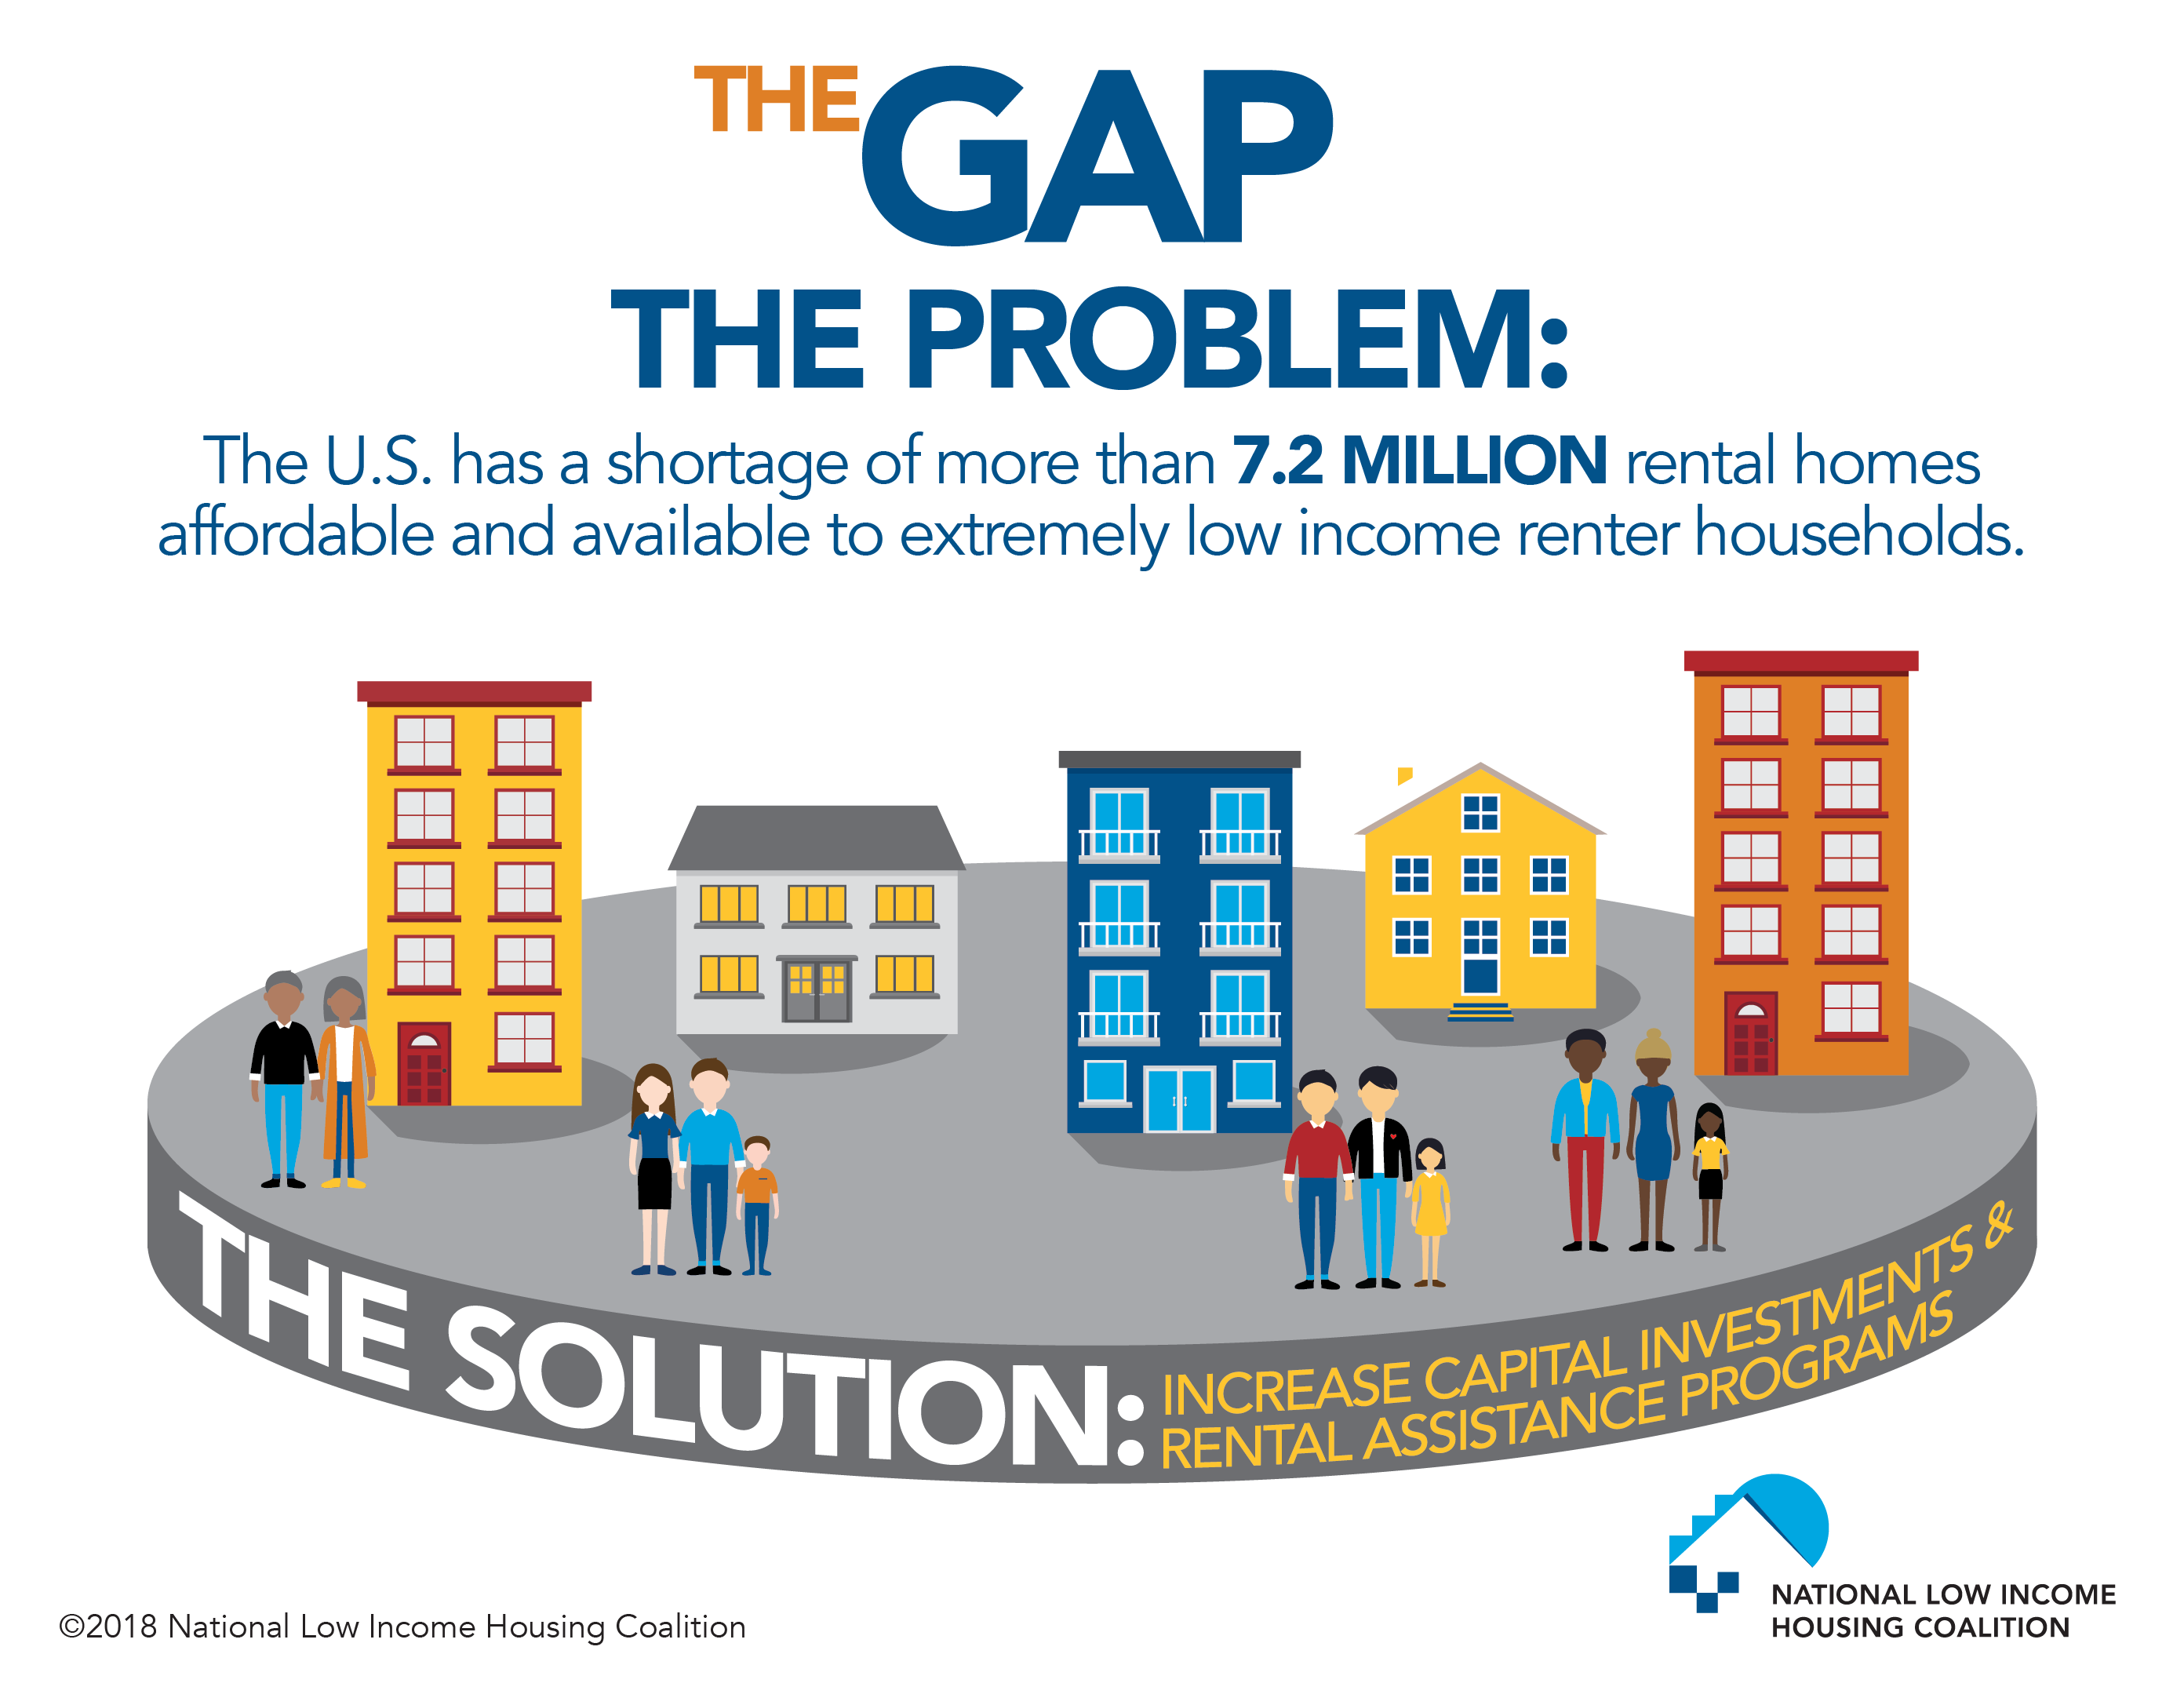 A new report by the National Low Income Housing Coalition (NLIHC) has determined there is a shortage of 7.2 million affordable and available rental homes for extremely low income (ELI) renter households, those with incomes at or below the poverty level or